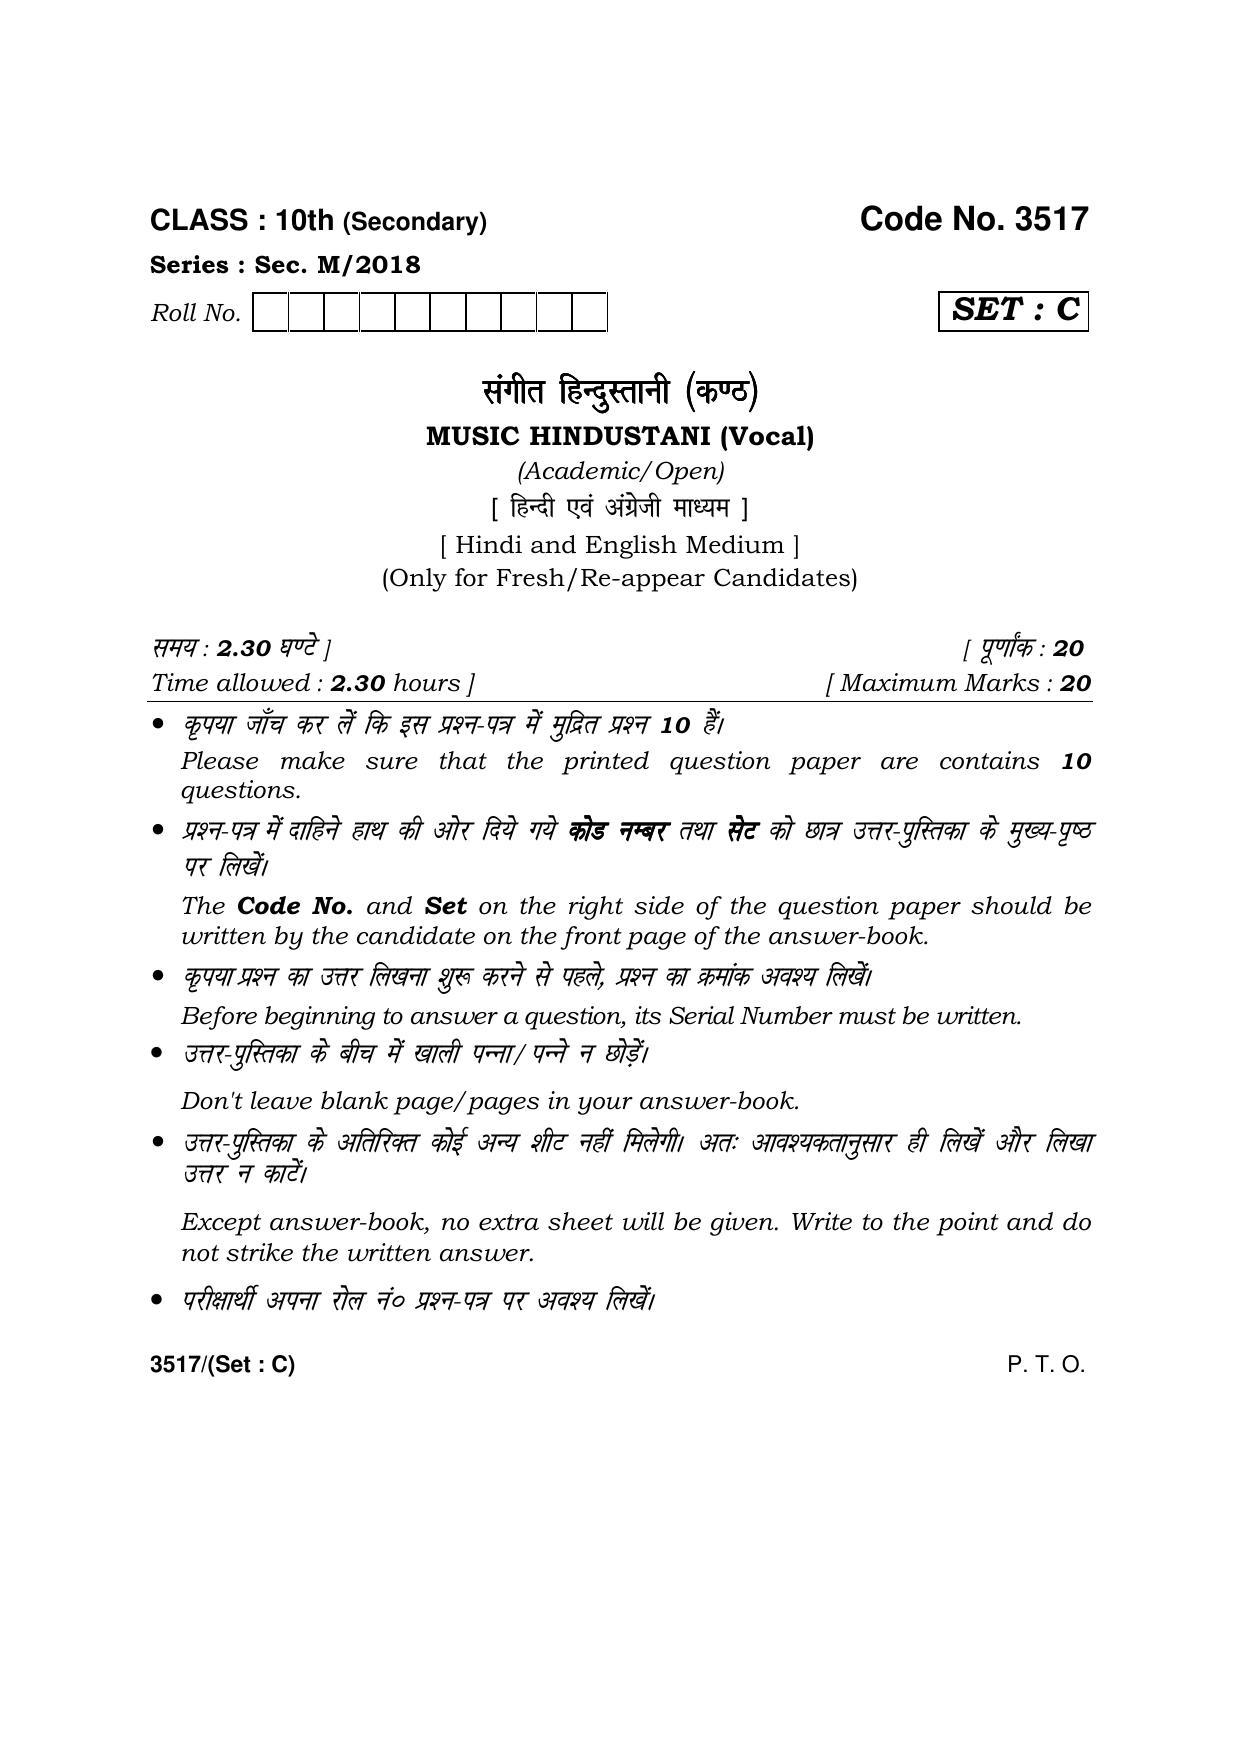 Haryana Board HBSE Class 10 Music Hindustani (Vocal) -C 2018 Question Paper - Page 1